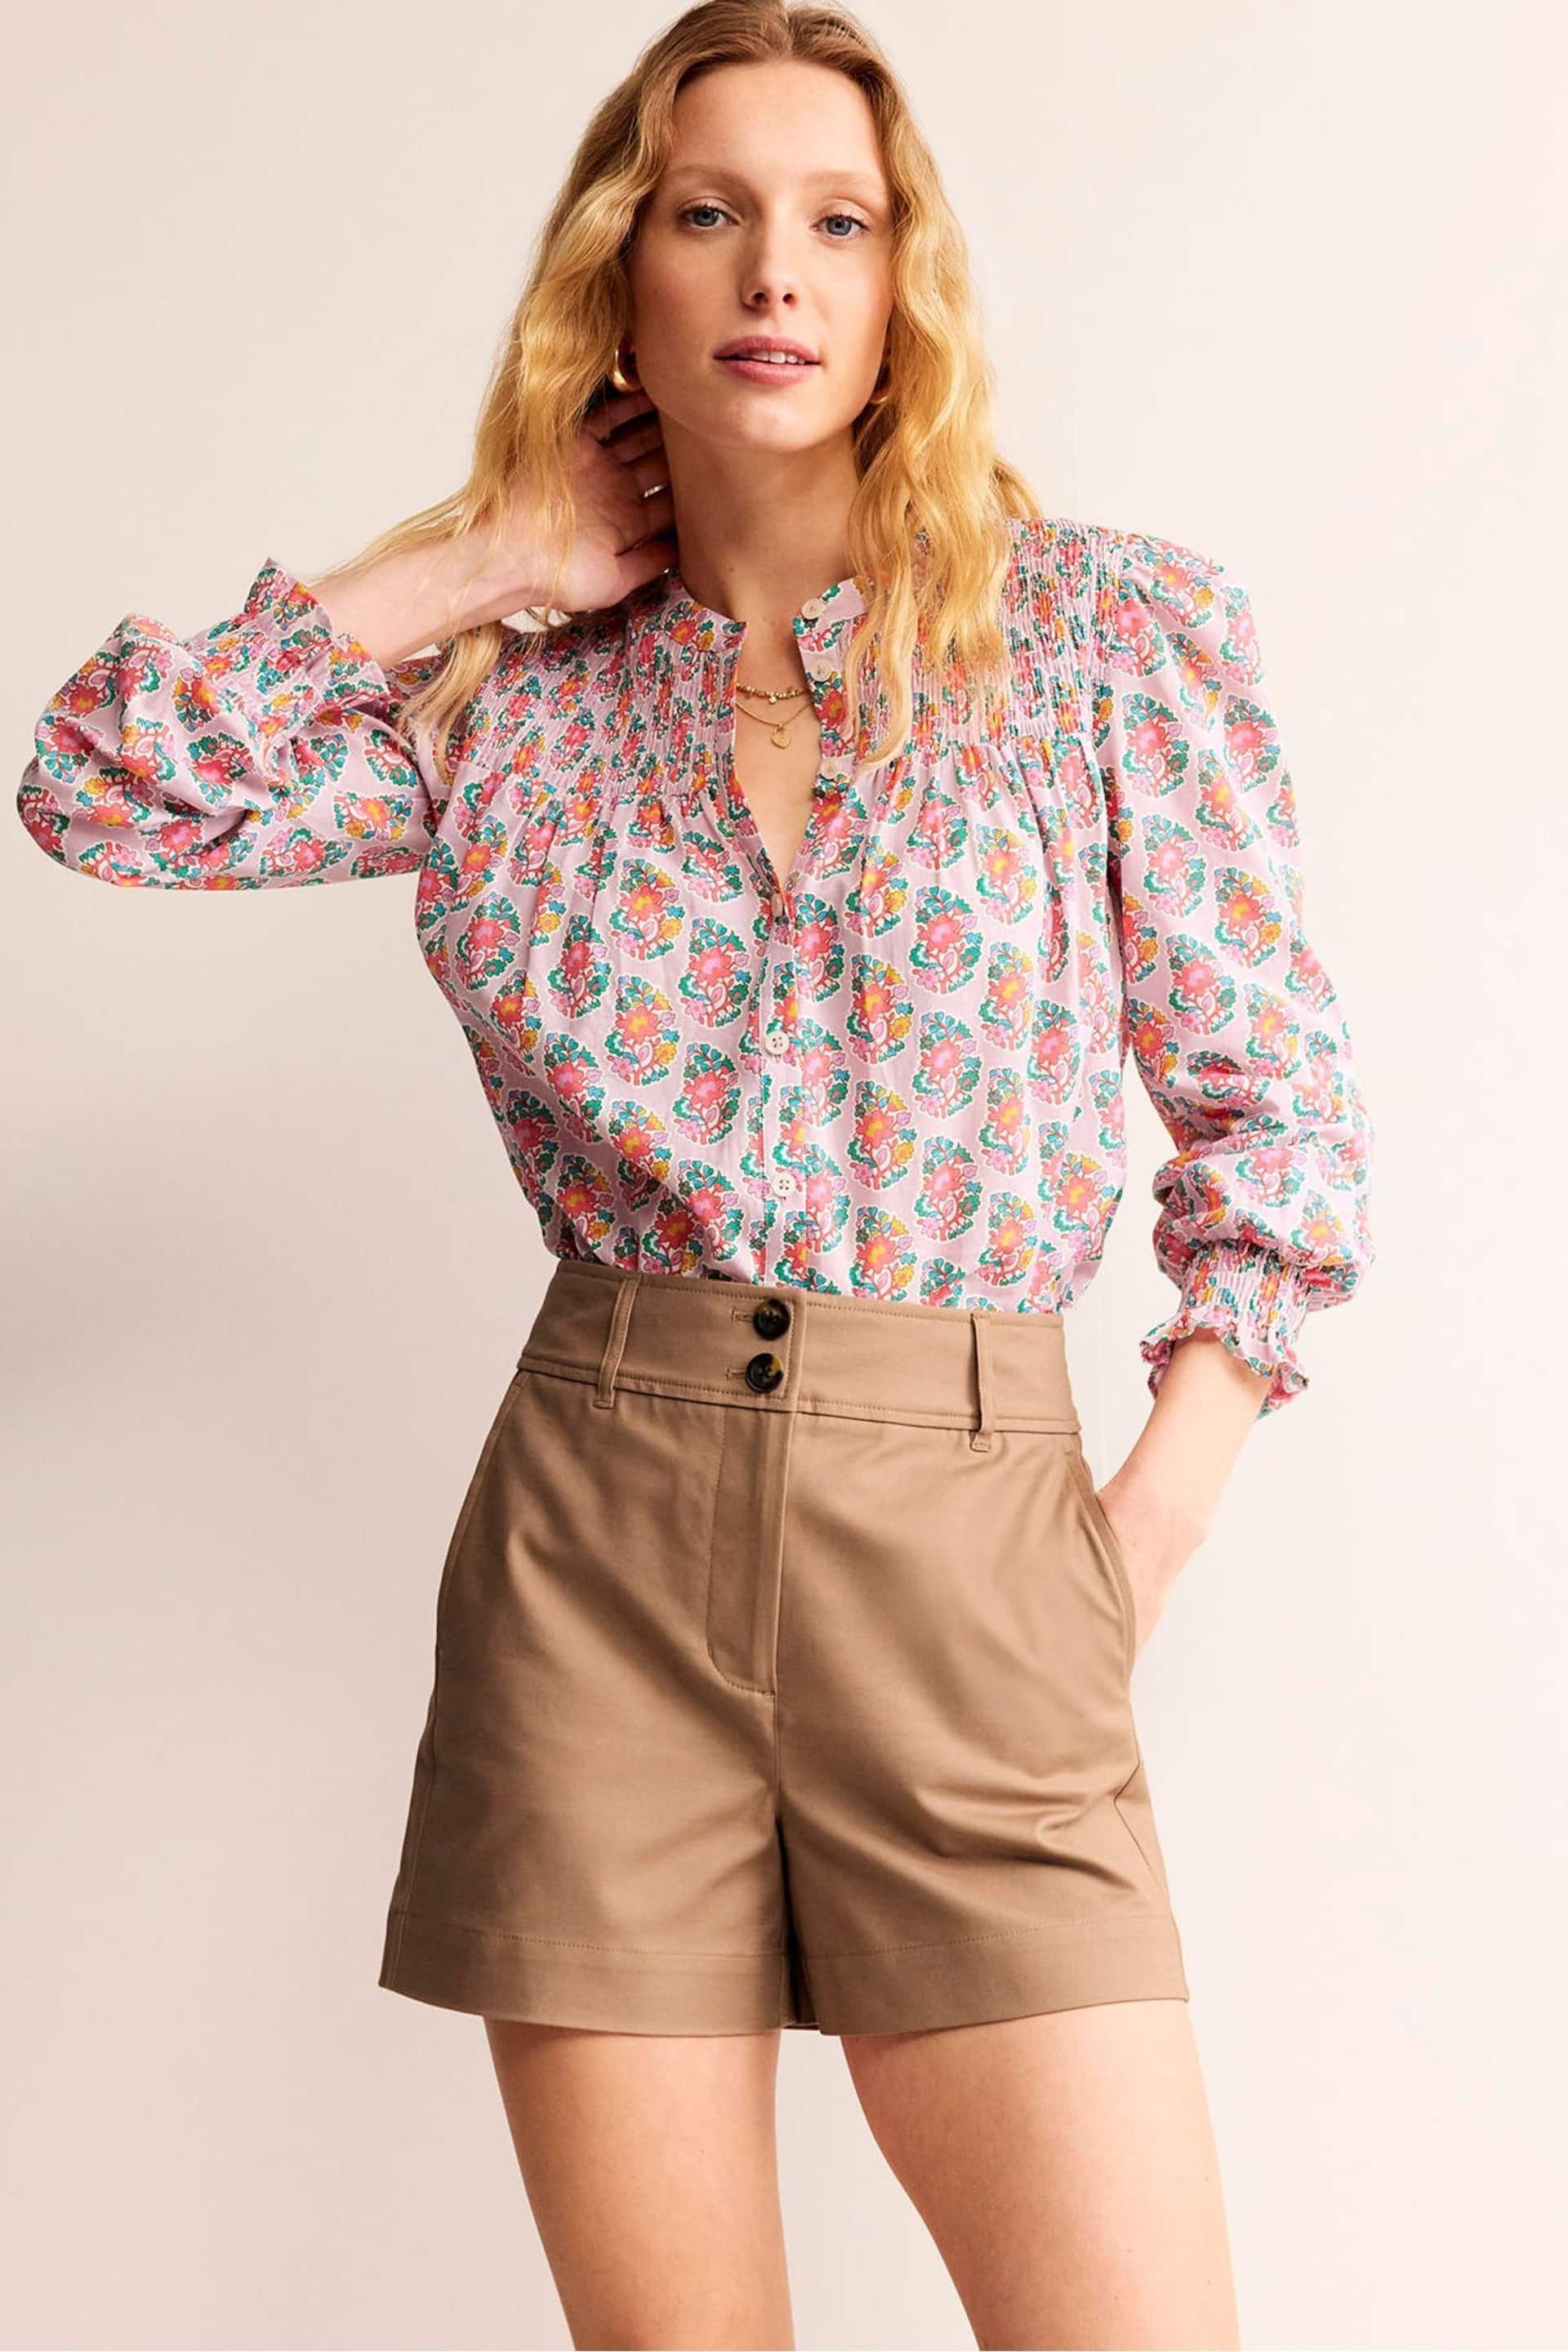 Boden Brown Westbourne Sateen Shorts - Image 1 of 5